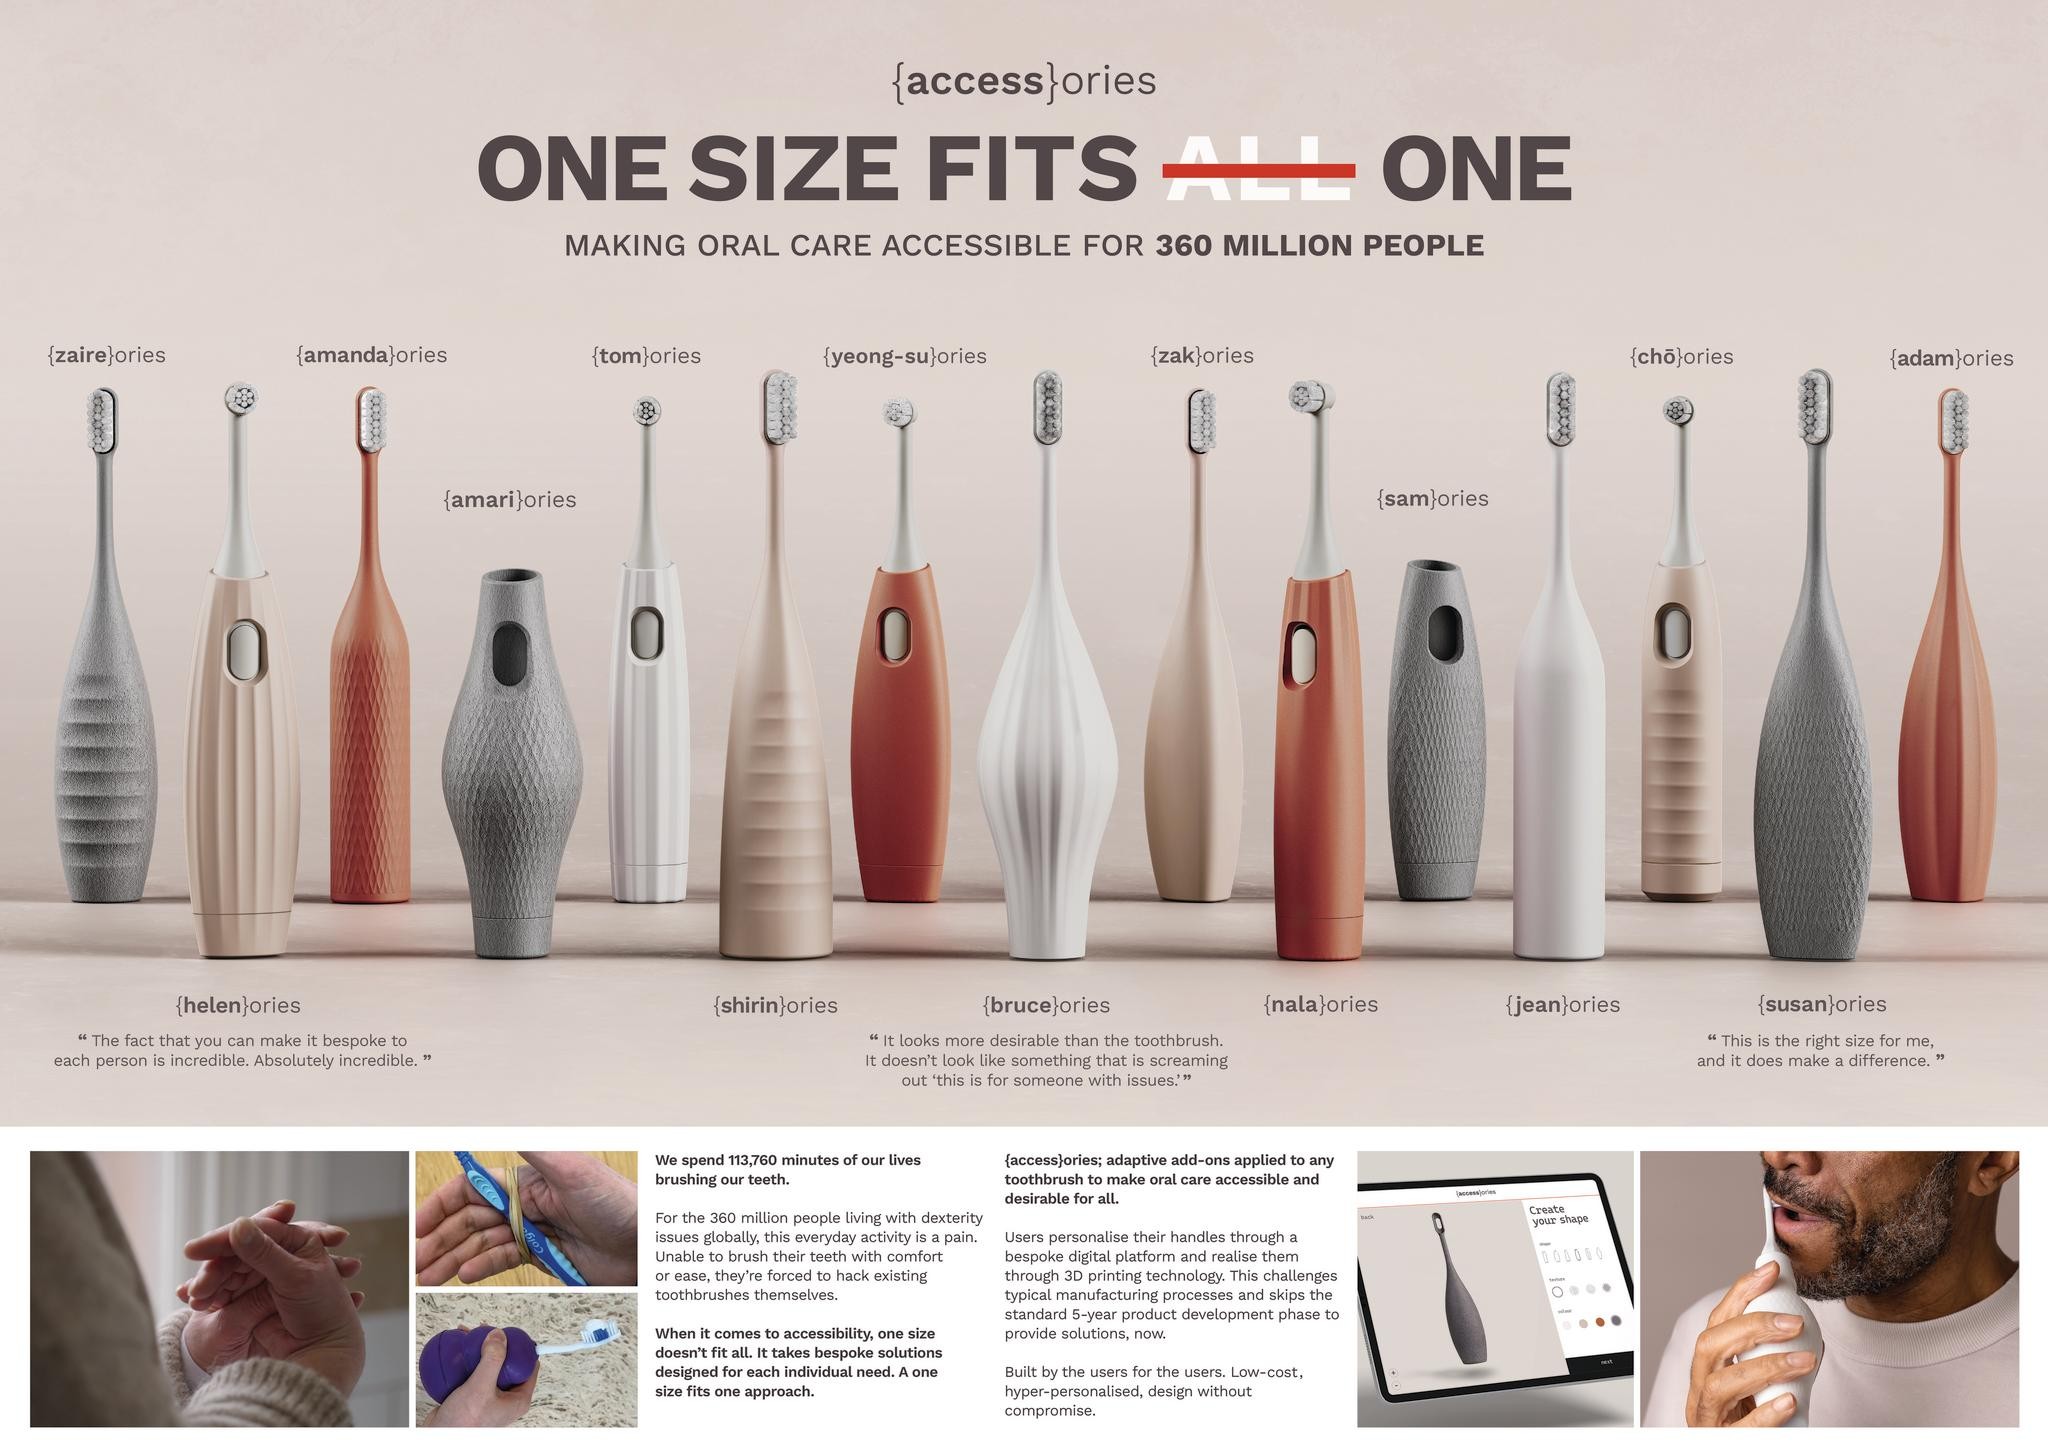 ONE SIZE FITS ONE – MAKING ORAL CARE ACCESSIBLE FOR 360 MILLION PEOPLE.